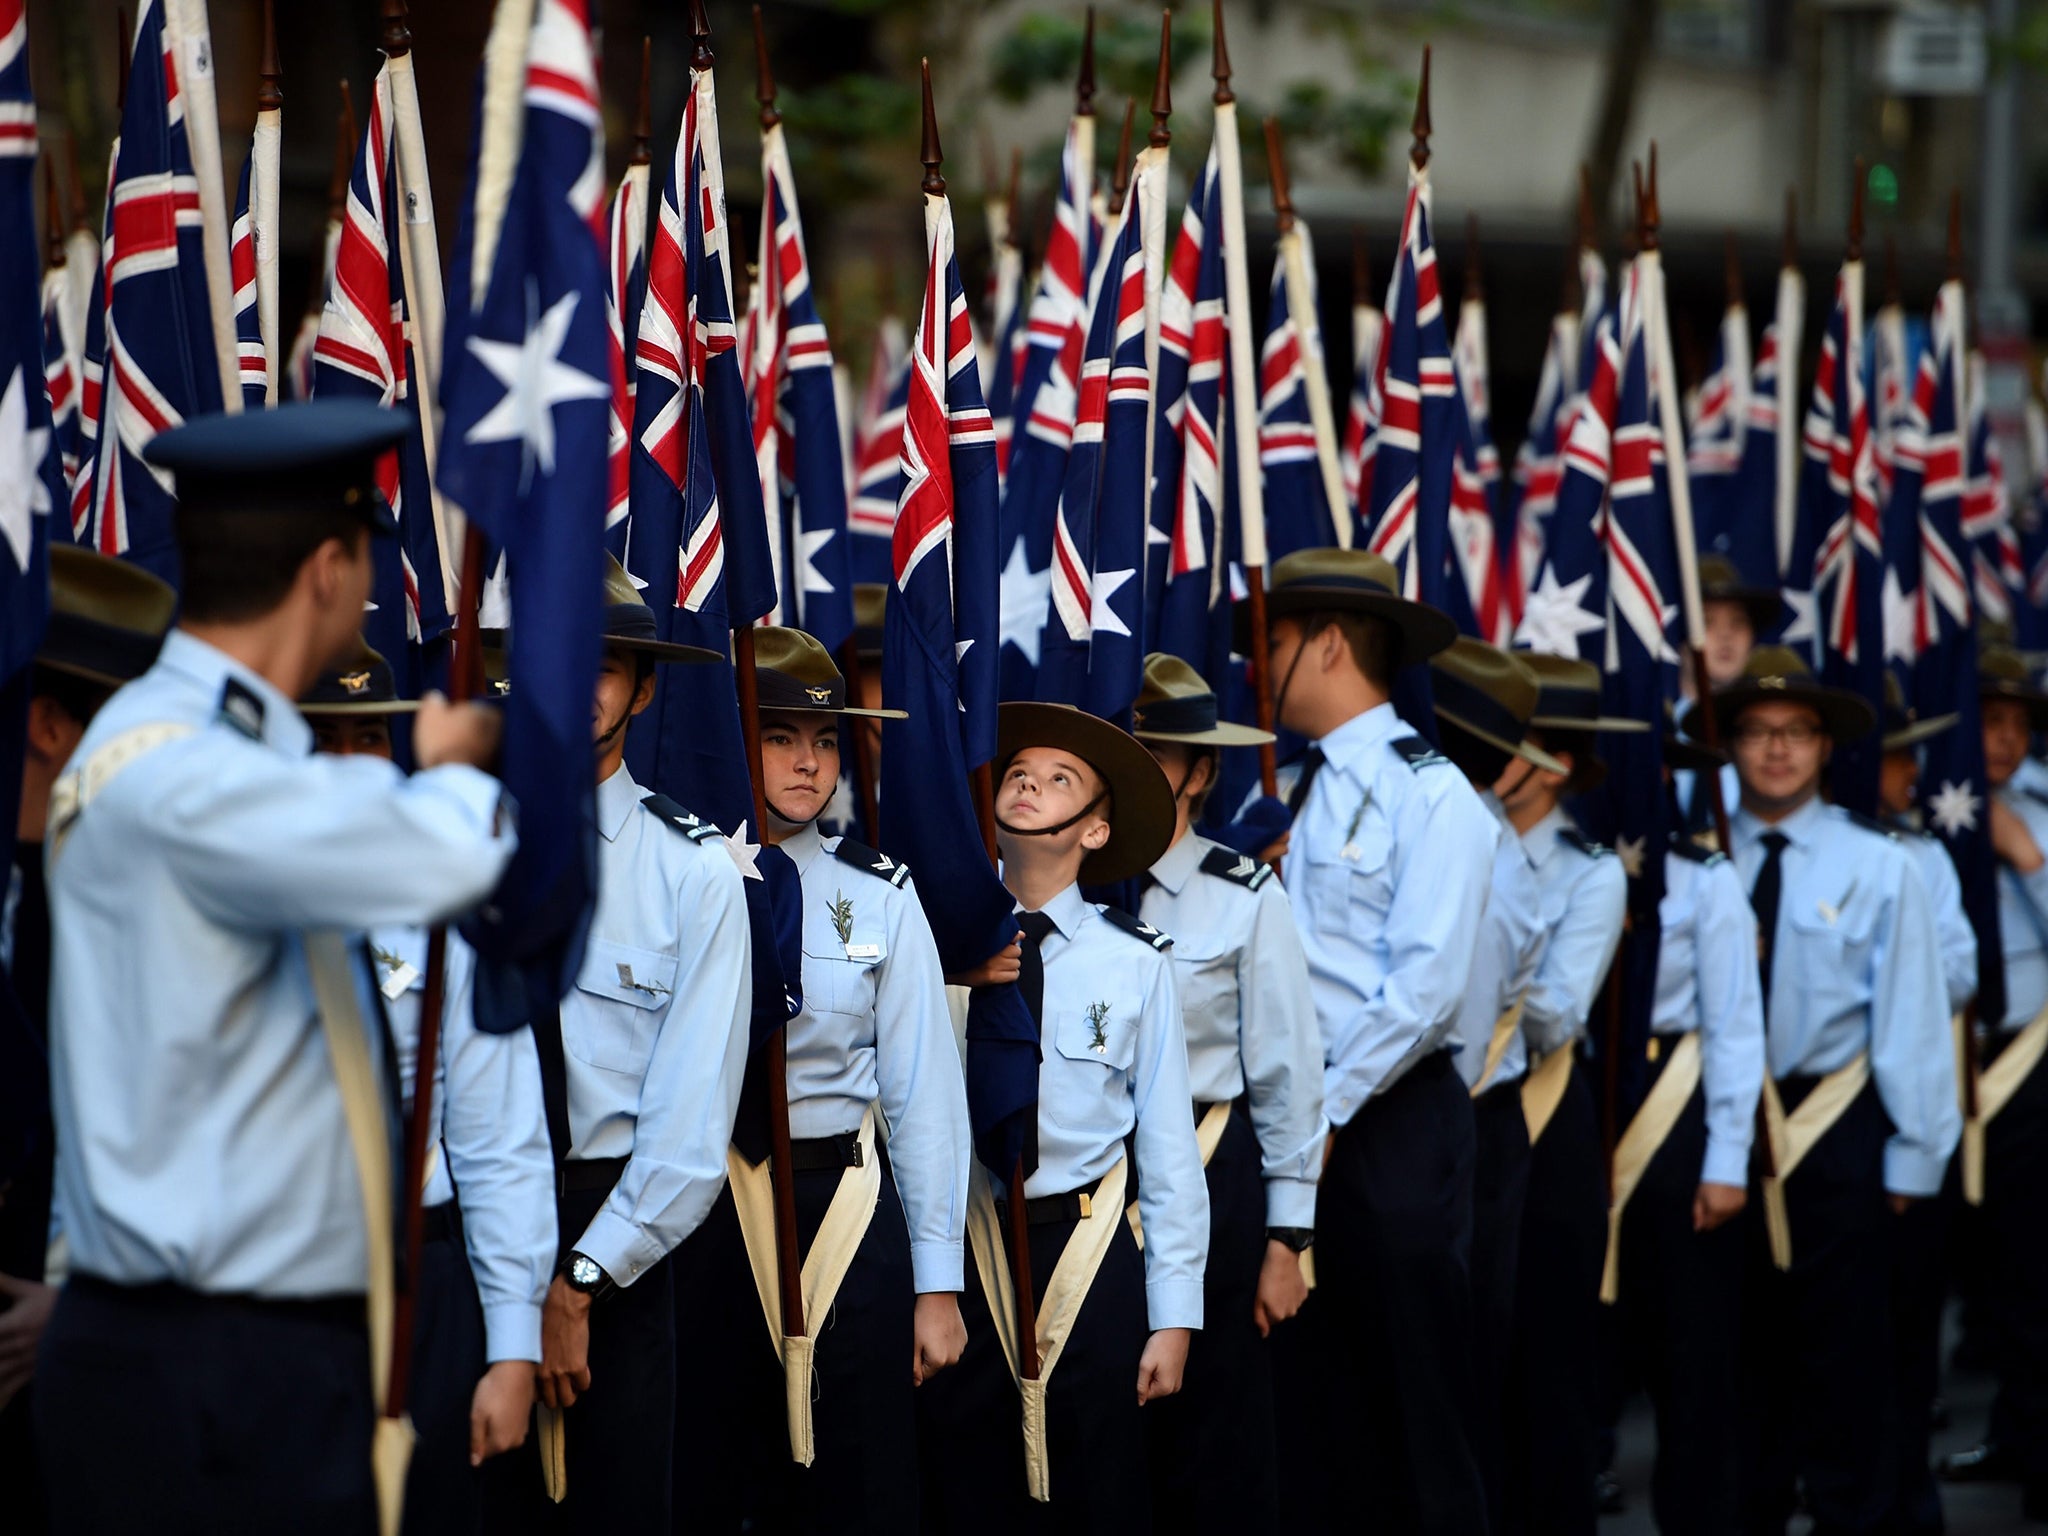 Anzac Day: What is it, and why is it celebrated in Australia and New Zealand?